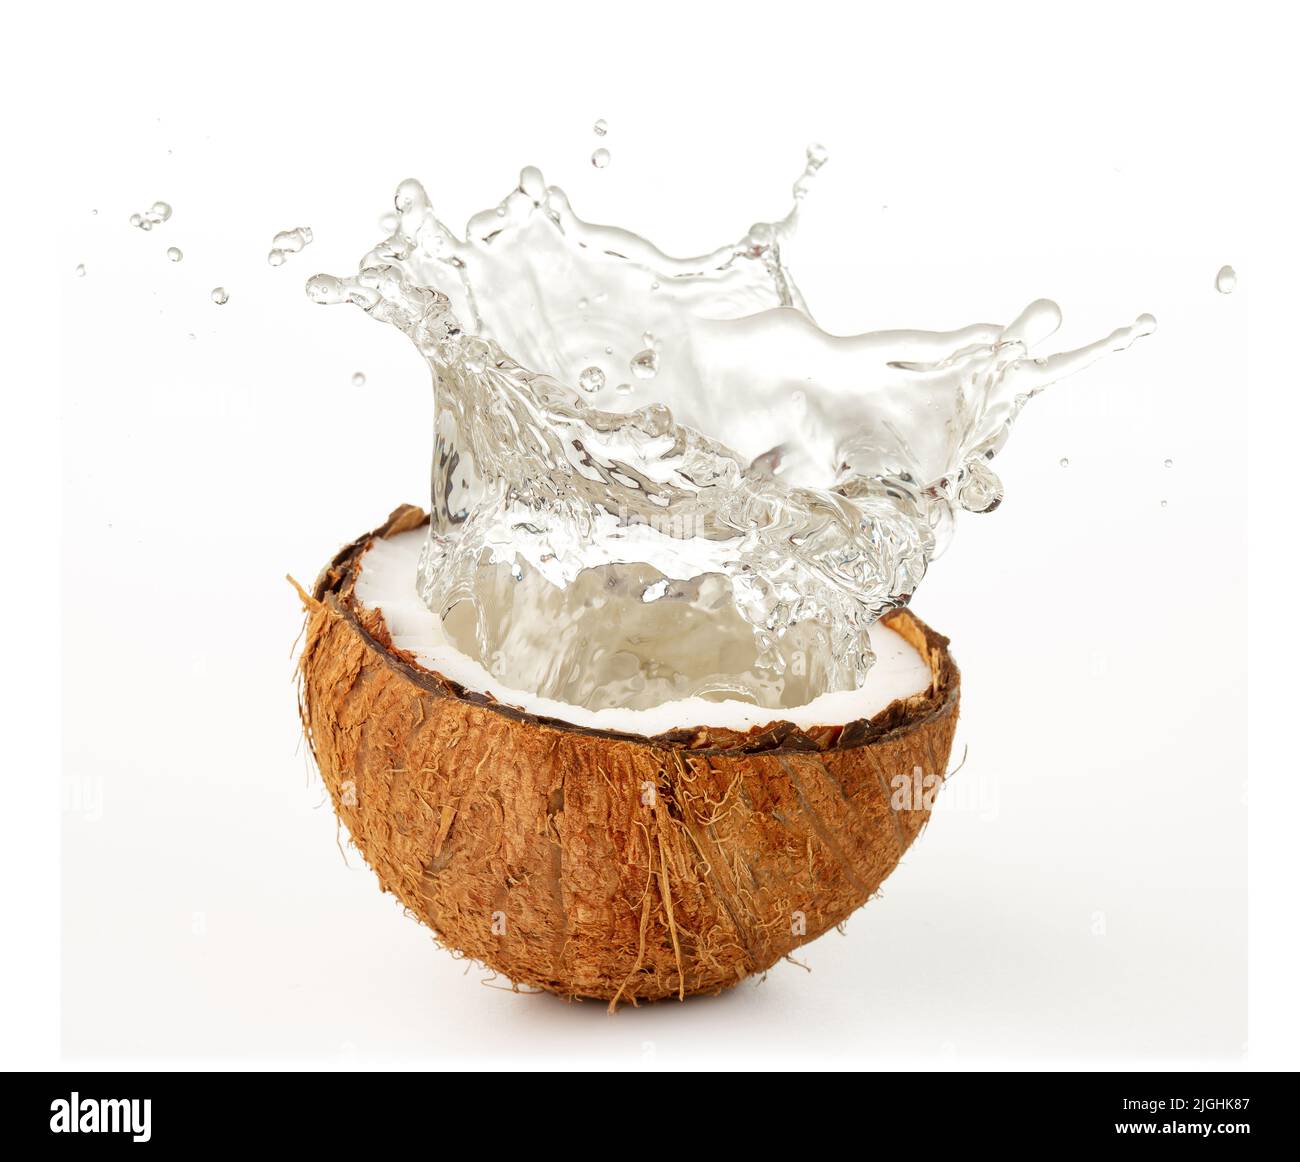 water splashing from a coco nut isolated on white Stock Photo